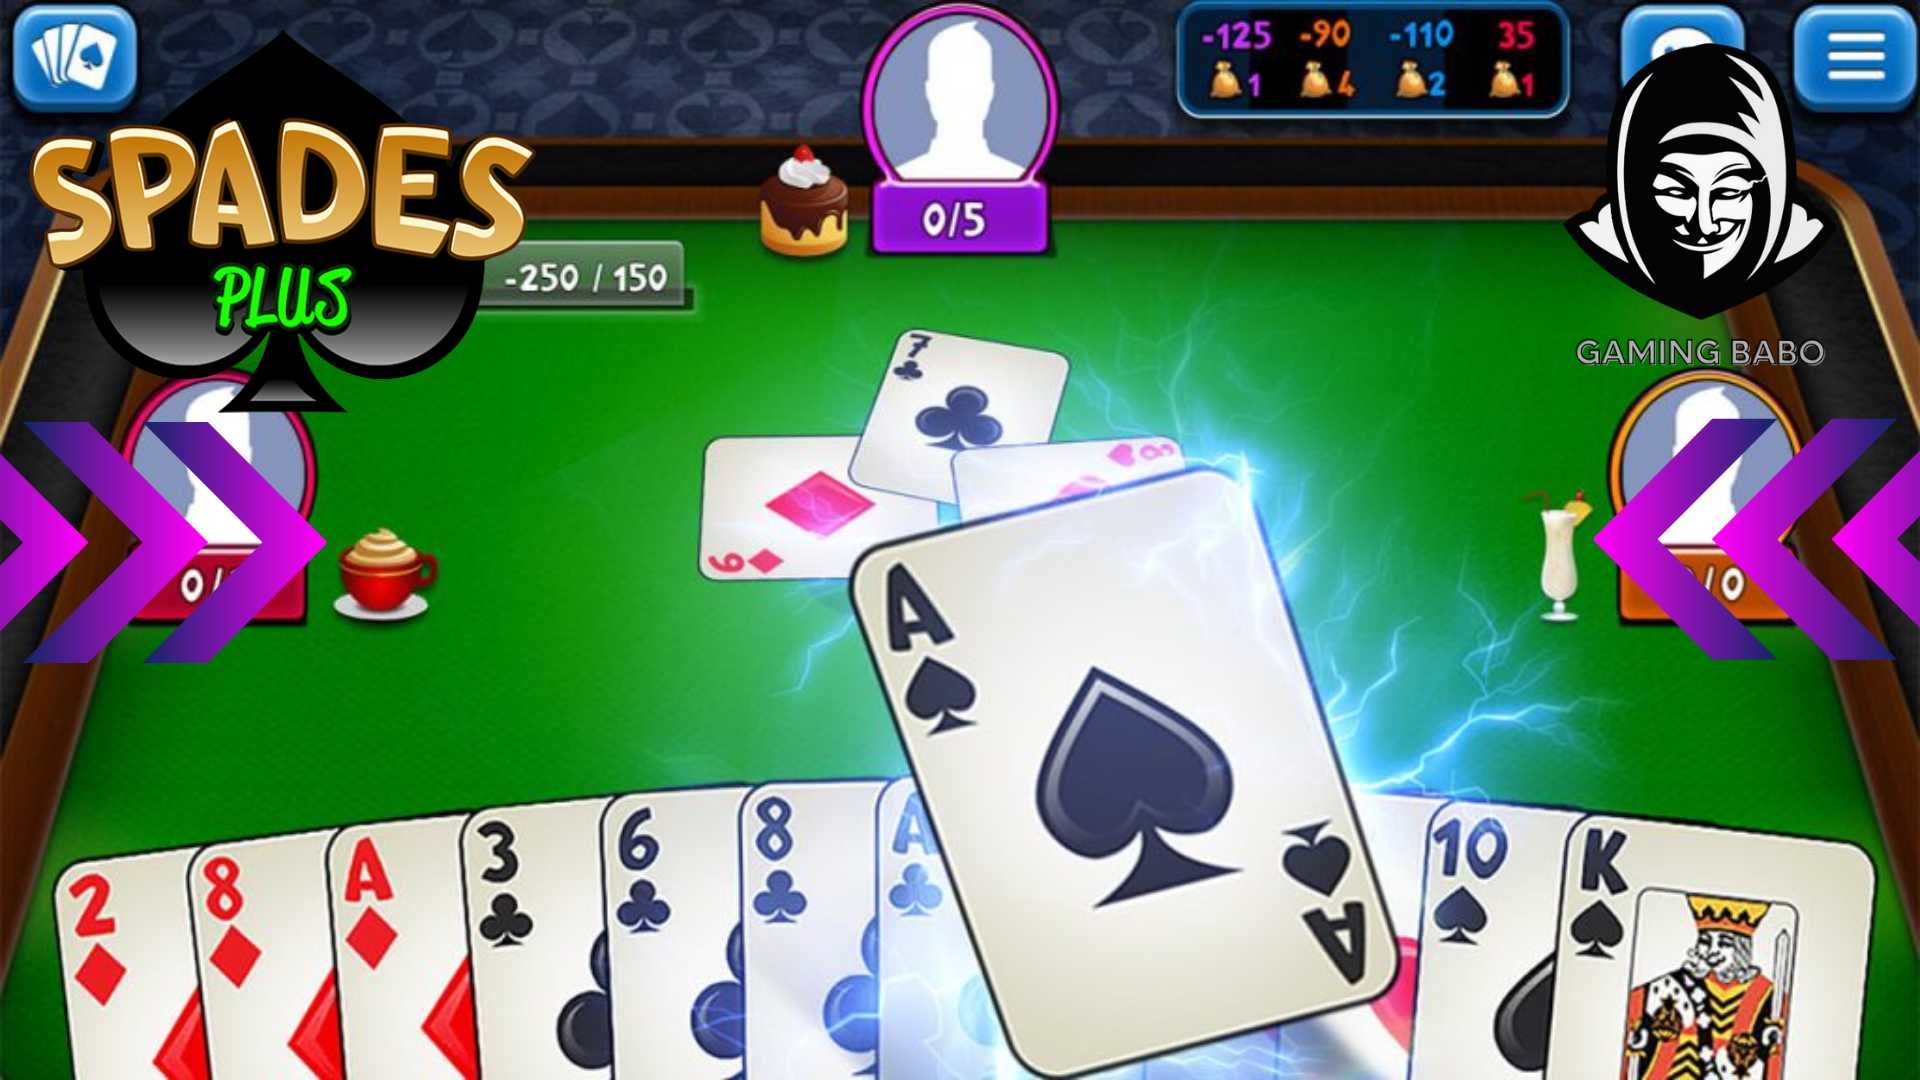 Spades Plus tips and tricks